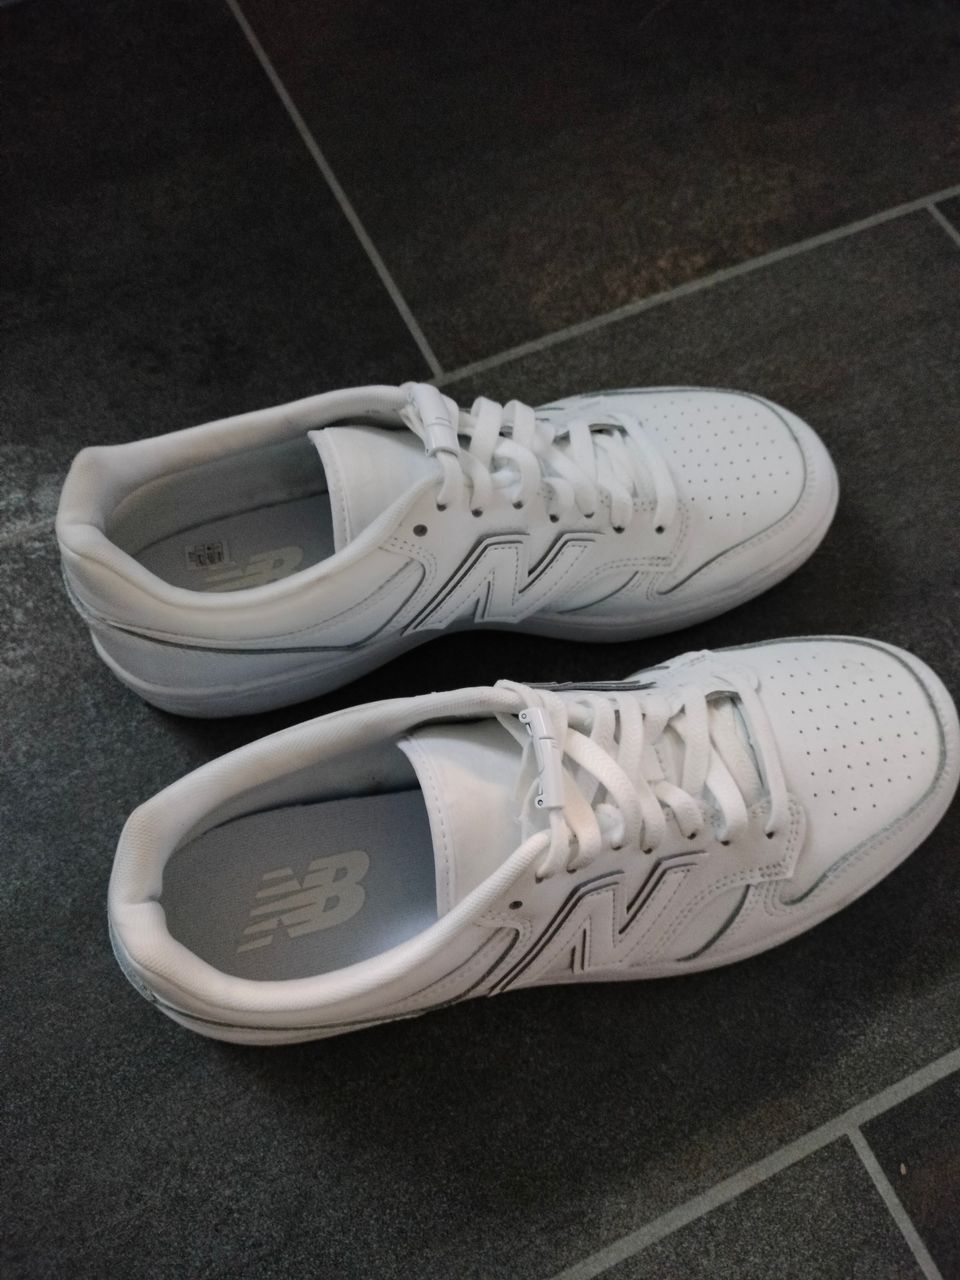 New balance sneakers 480